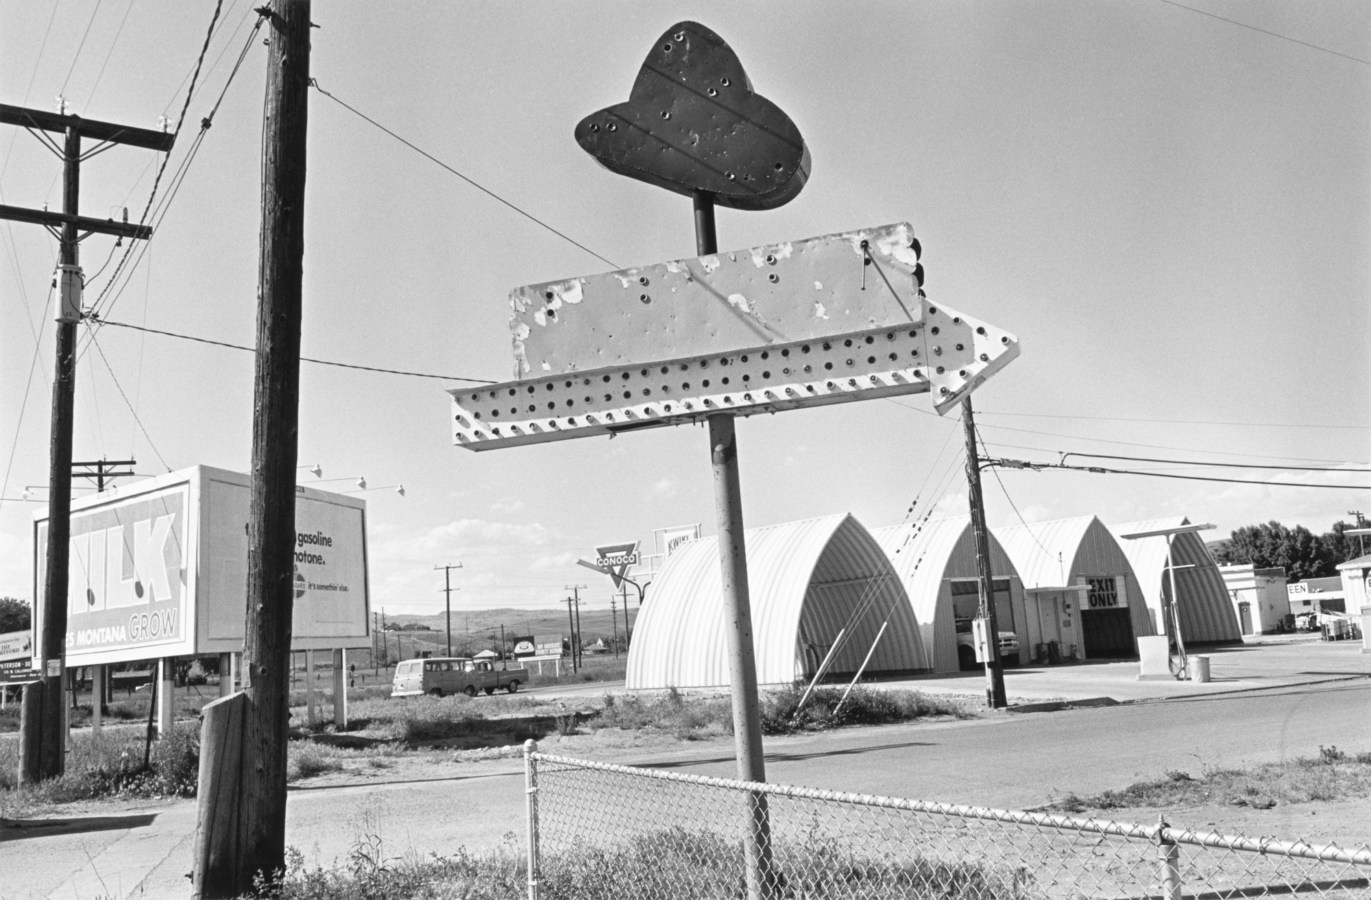 Black-and-white photograph of an old weathered neon sign shaped like a cowboy hat with an arrow pointing right